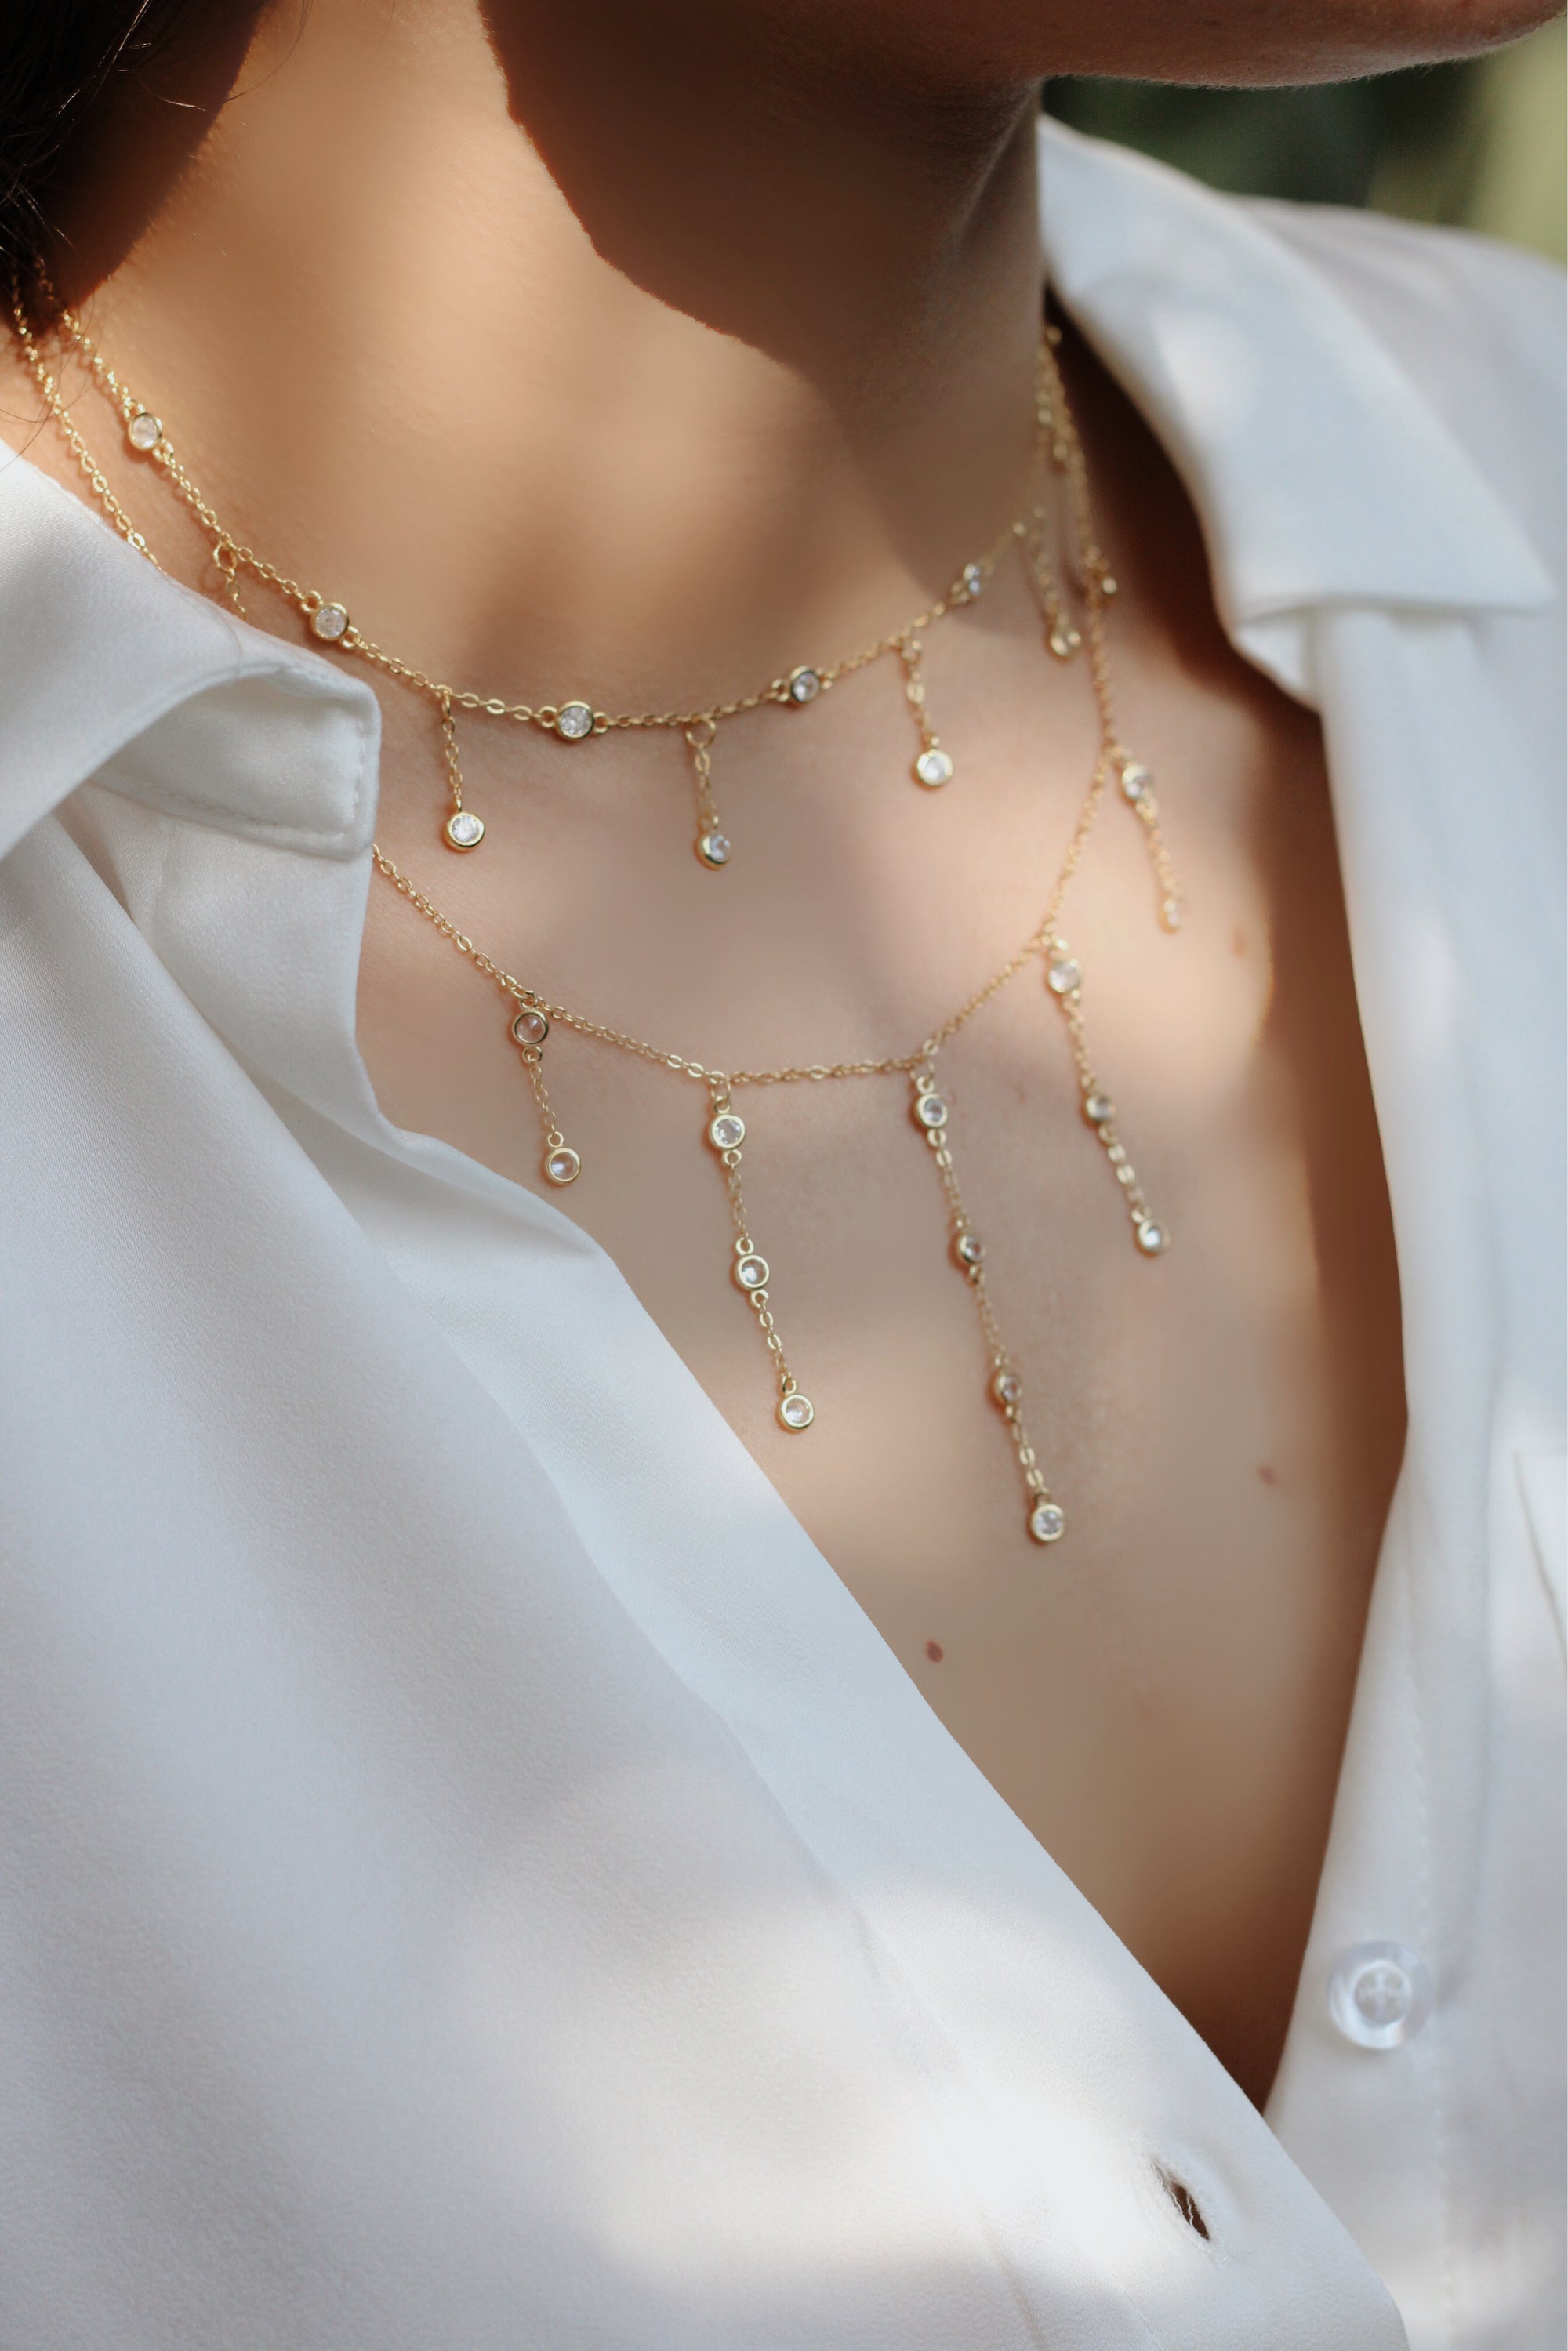 NECKLACE LENGTHS